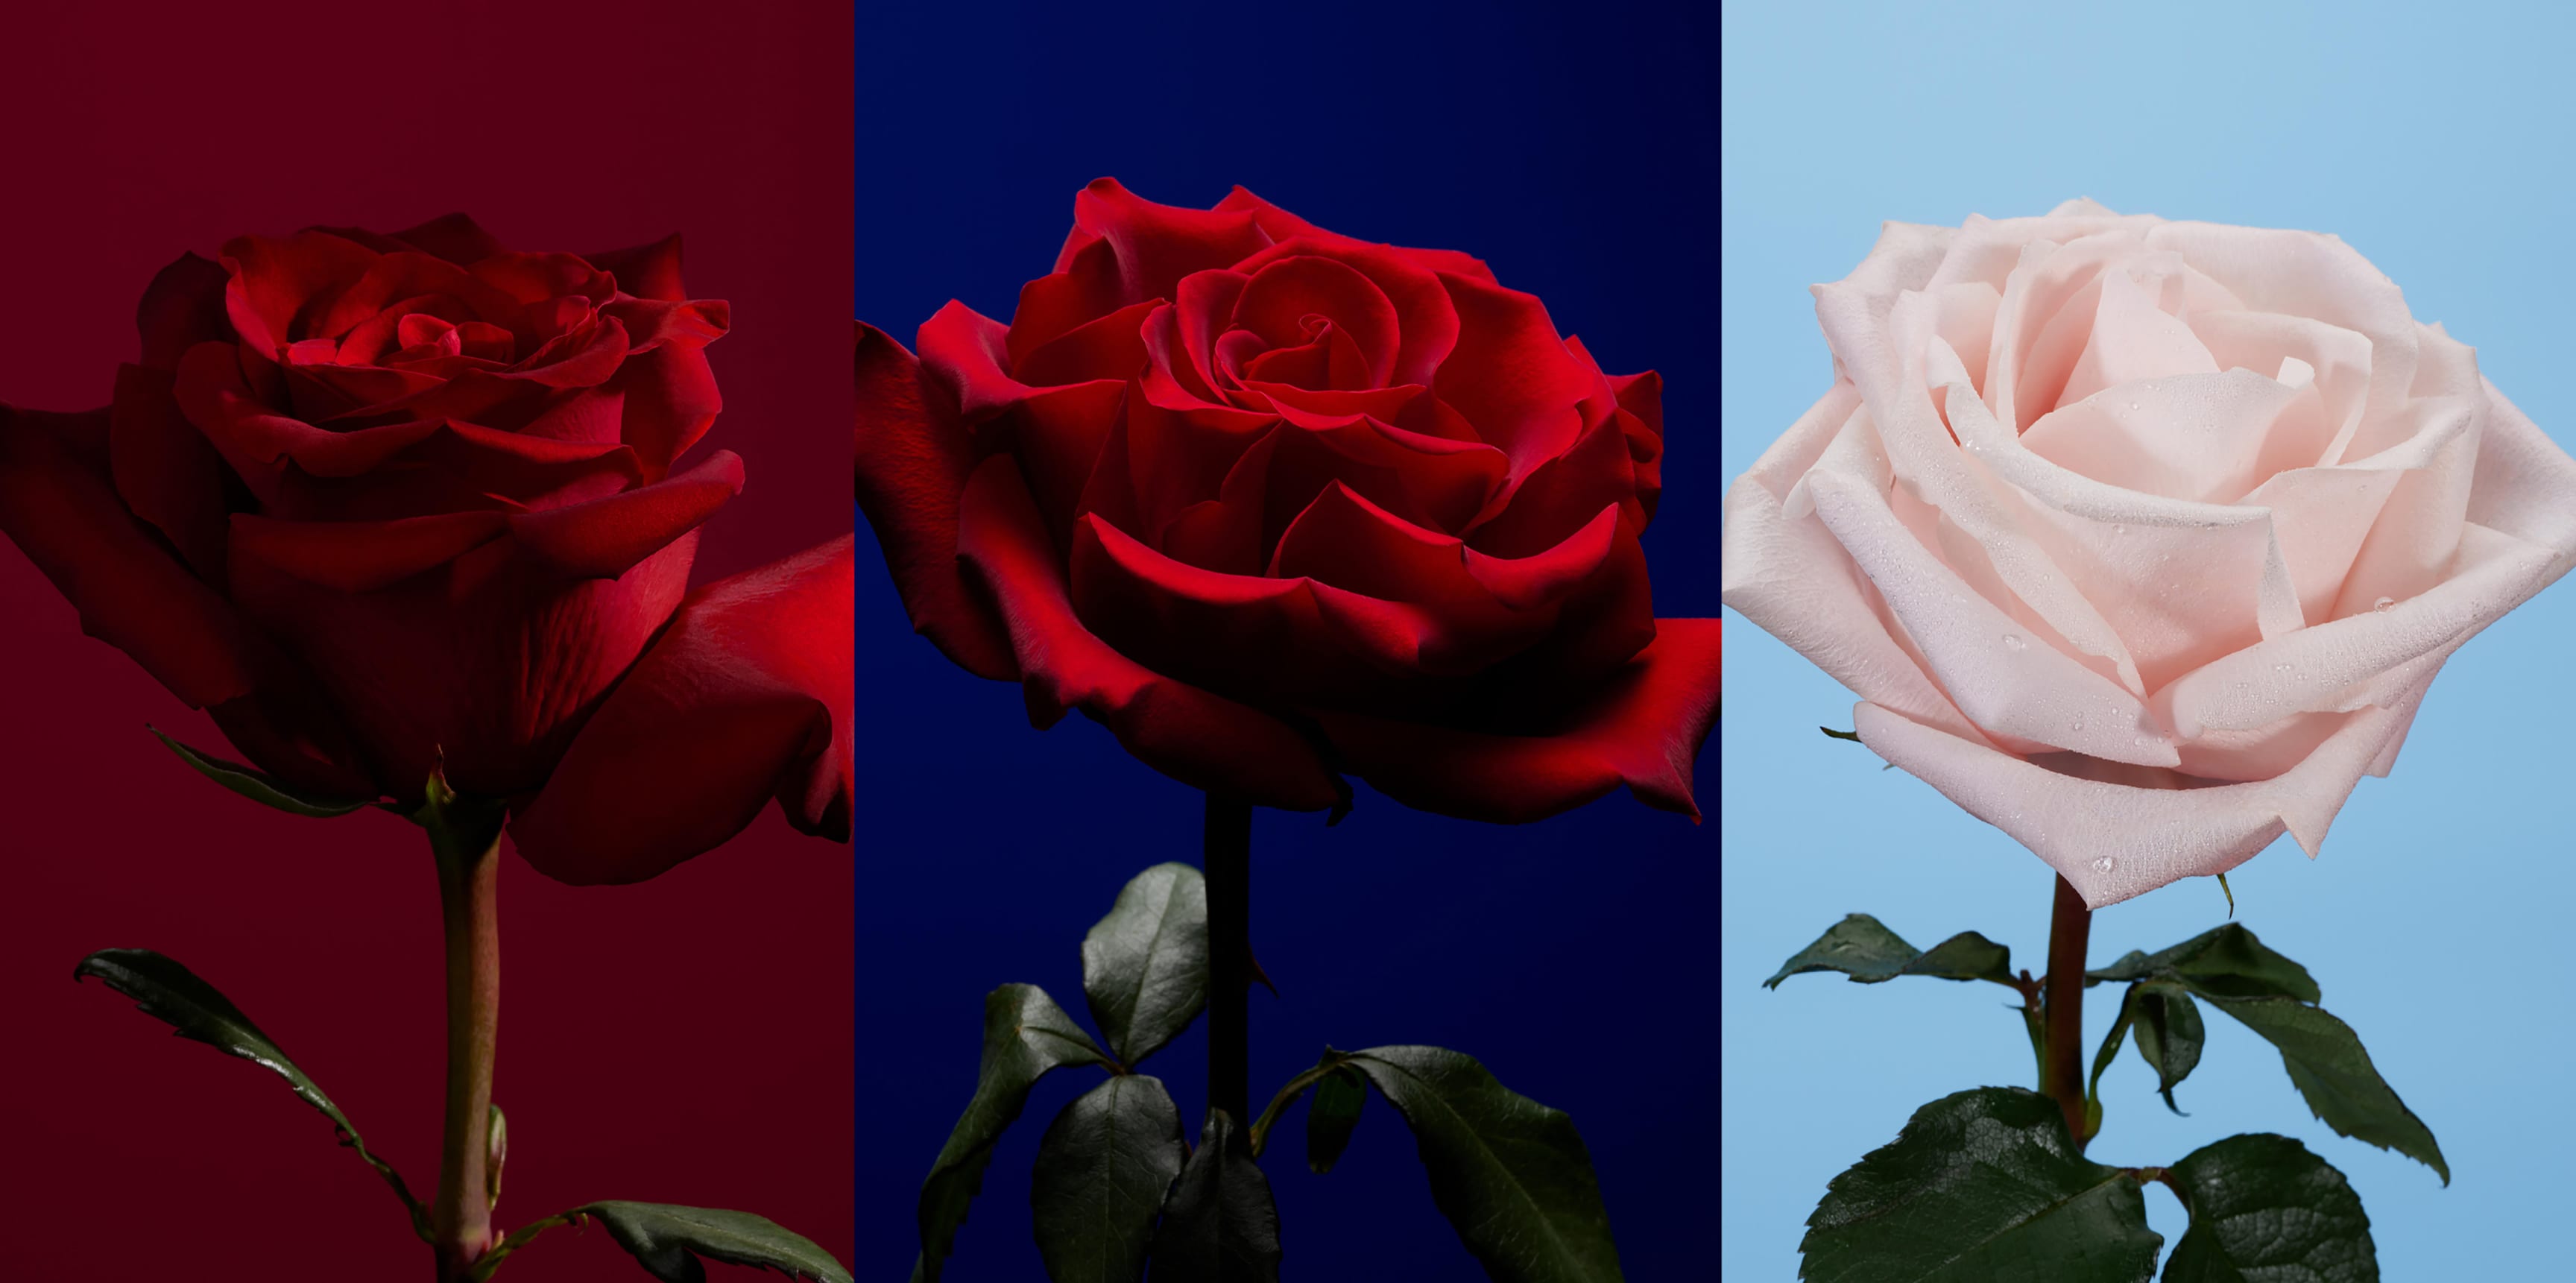 The Rose - Official Site